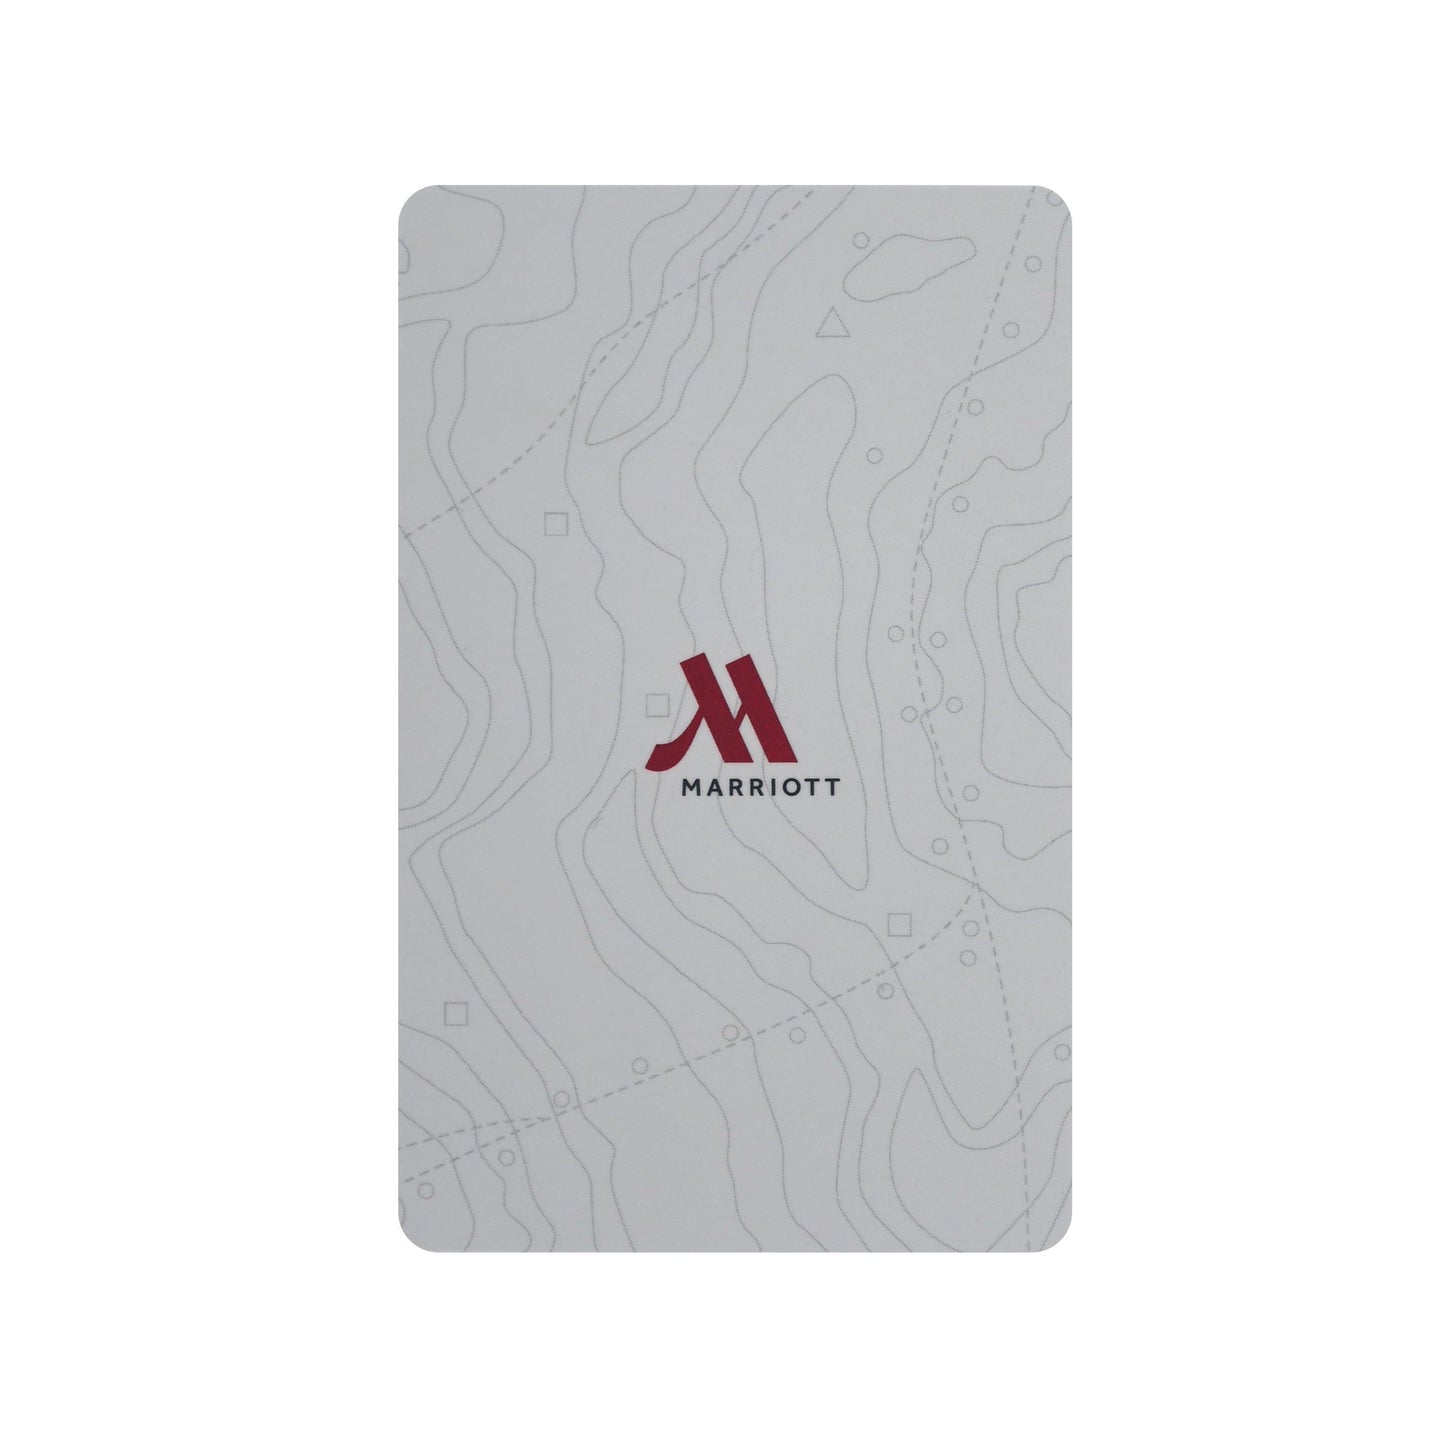 Marriott Full Service 1K RFID Key Cards (Sold in boxes of 200)